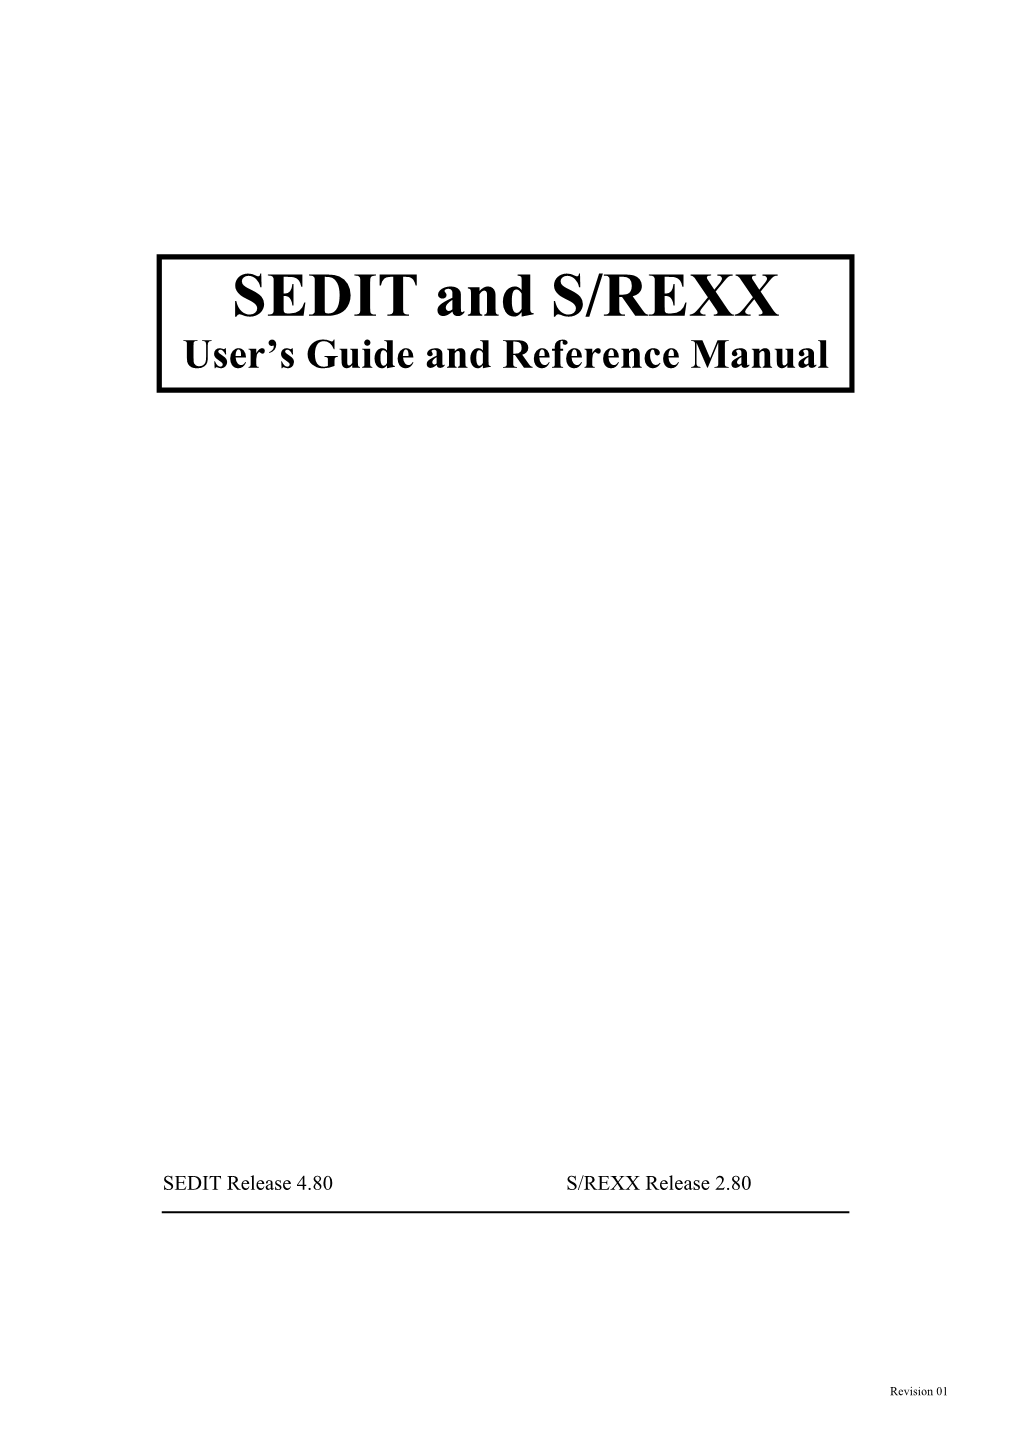 SEDIT and S/REXX User’S Guide and Reference Manual